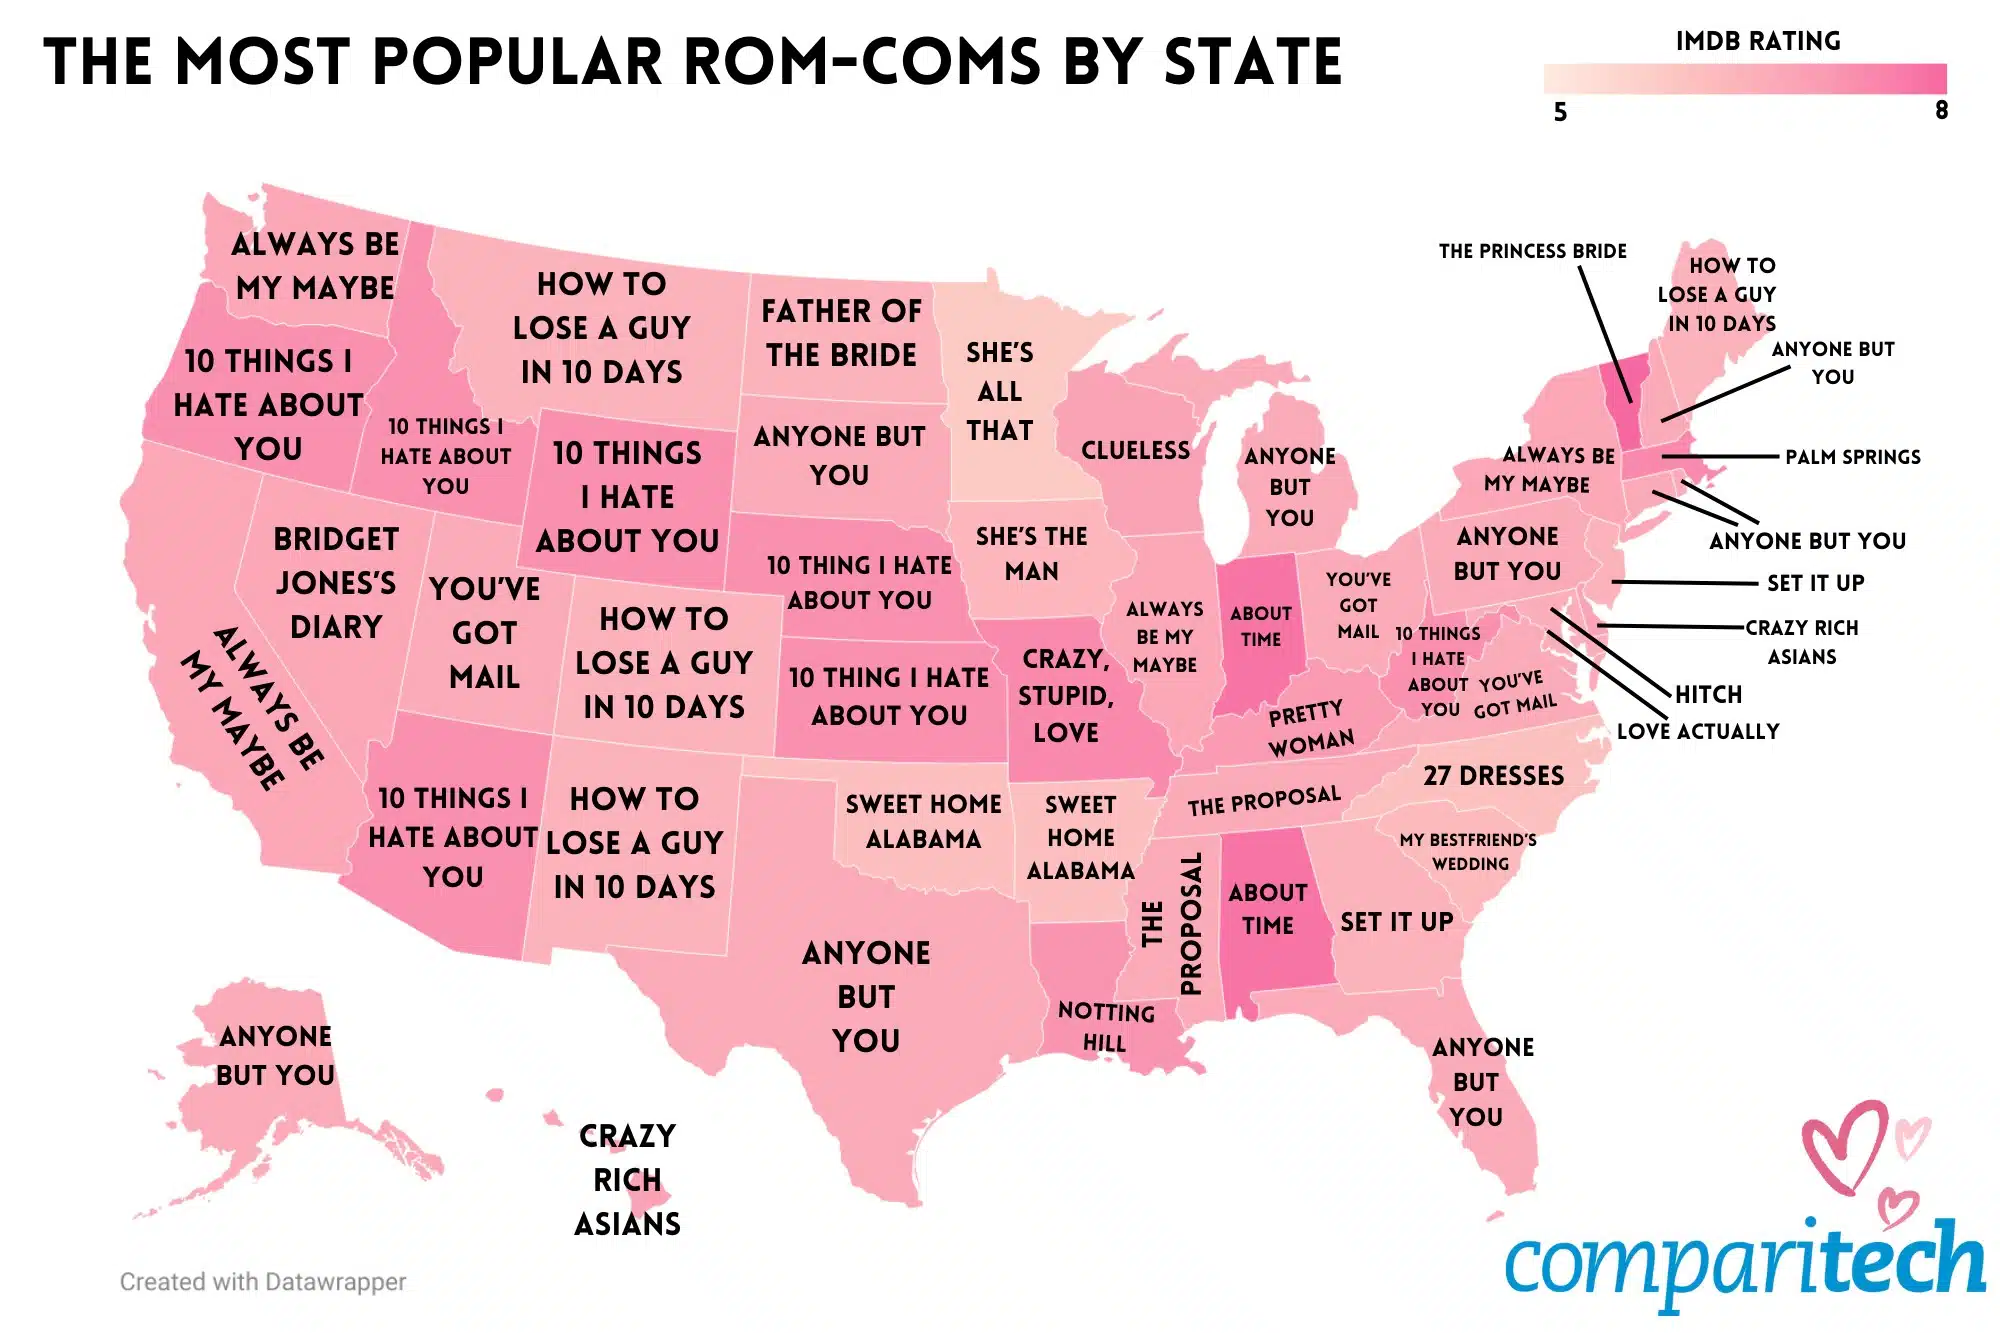 The most popular rom-coms by state